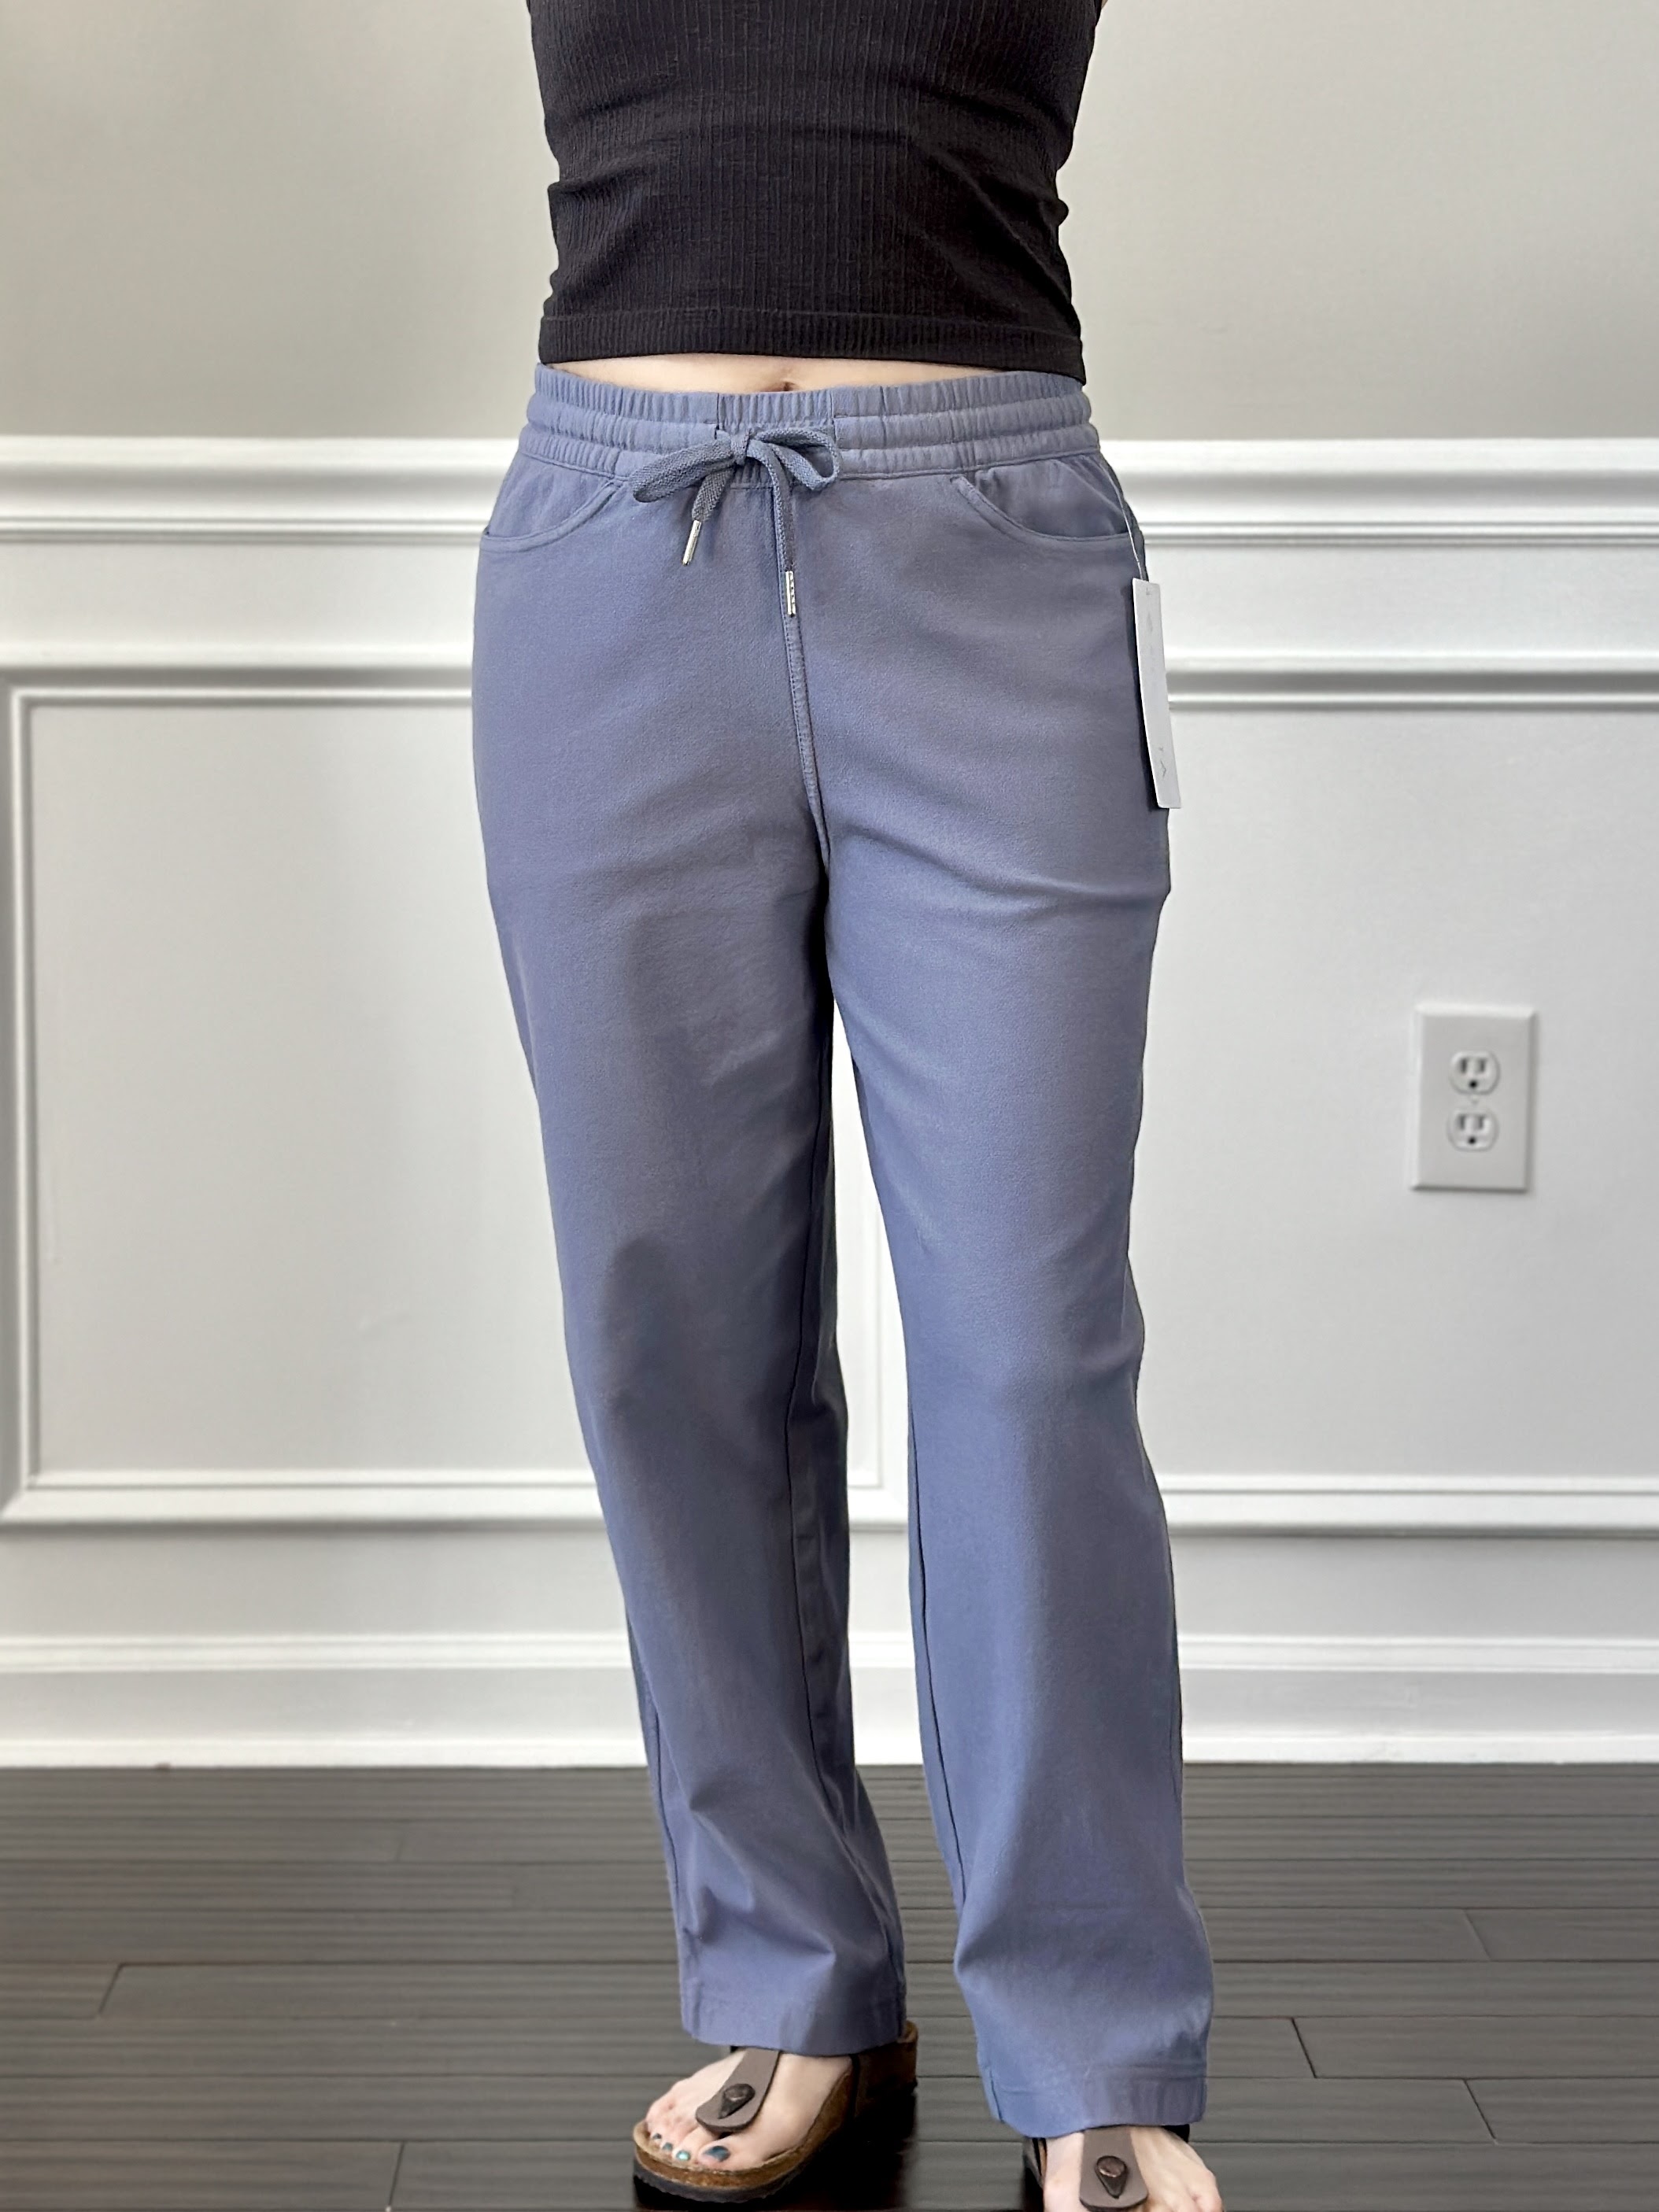 Athleta Brooklyn Lined Jogger Cropped Blue Soft Jersey Women's